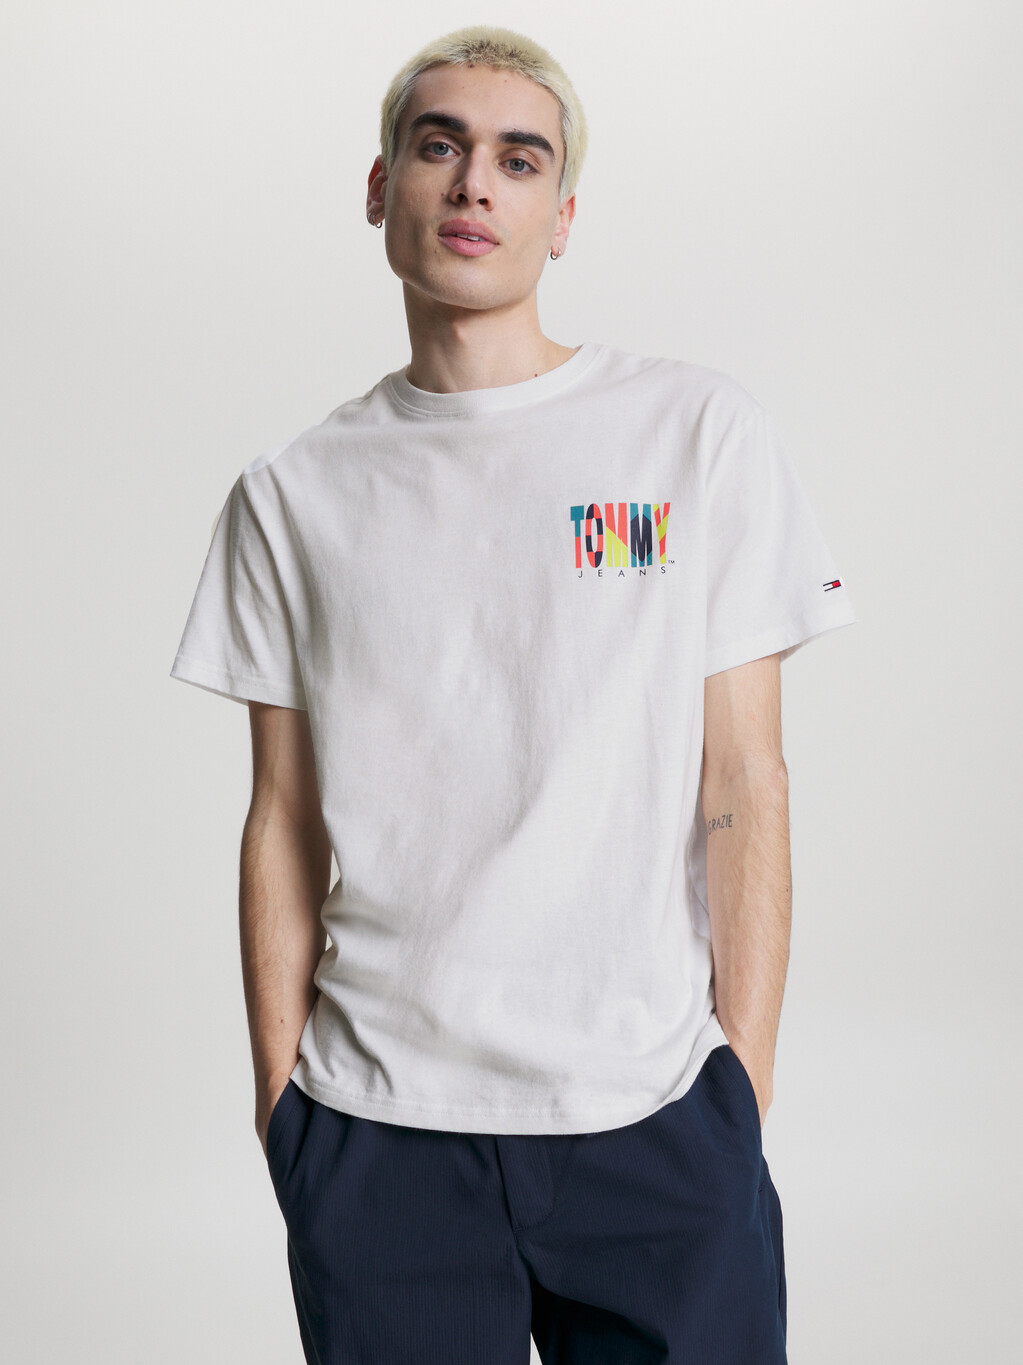 Archive Back Logo Classic Fit T-Shirt | | Tommy Hilfiger Malaysia